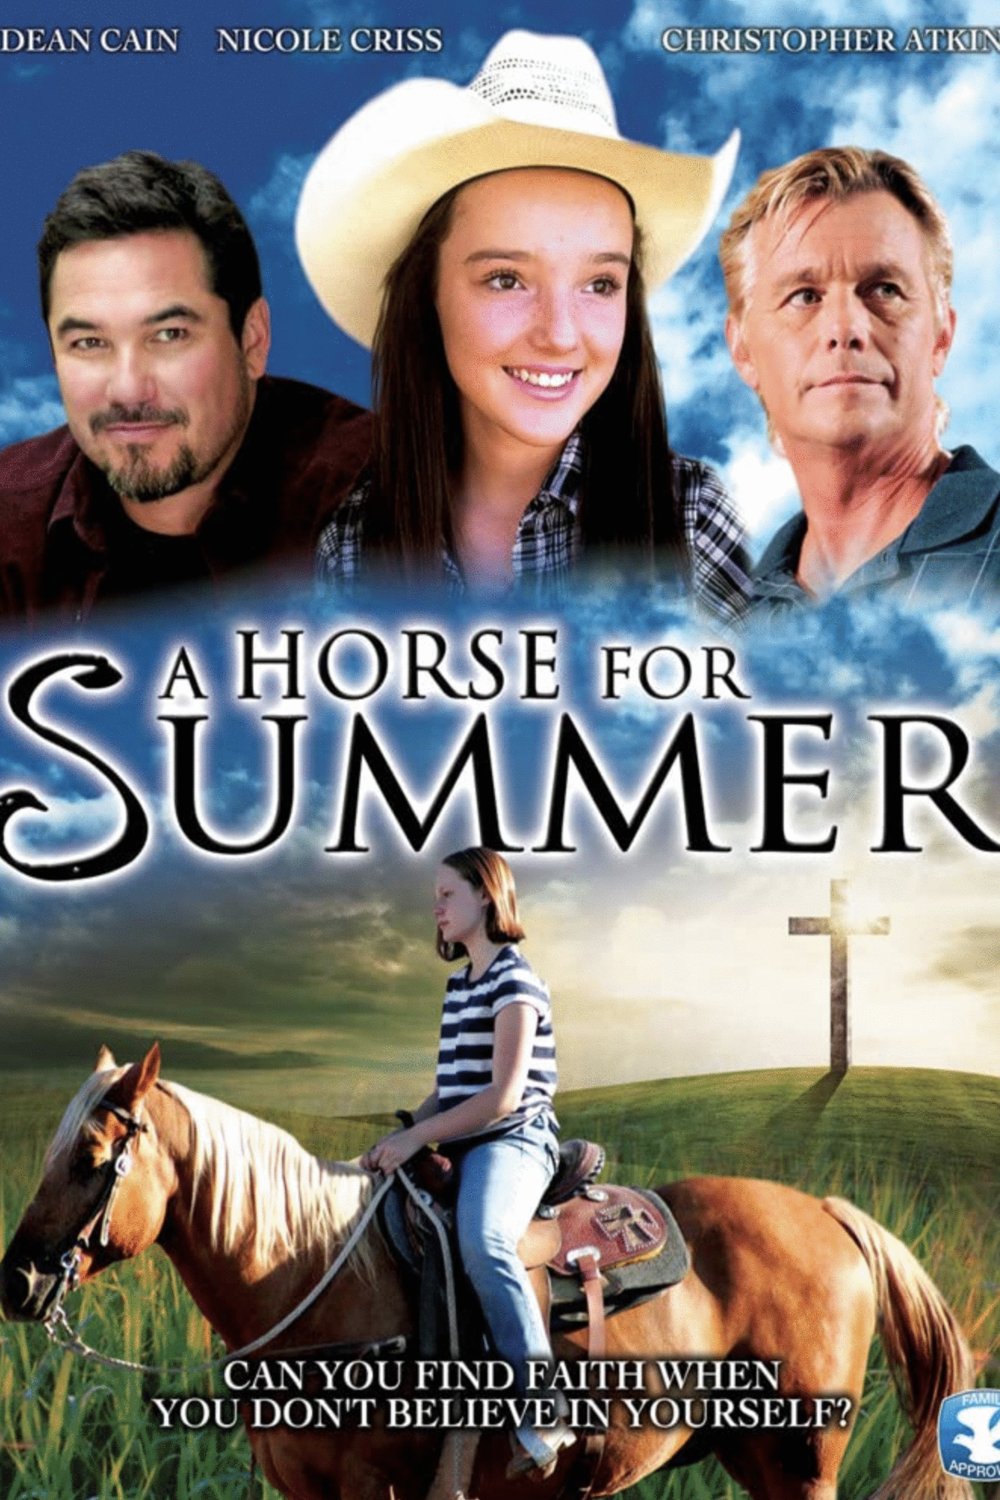 Poster of the movie A Horse for Summer